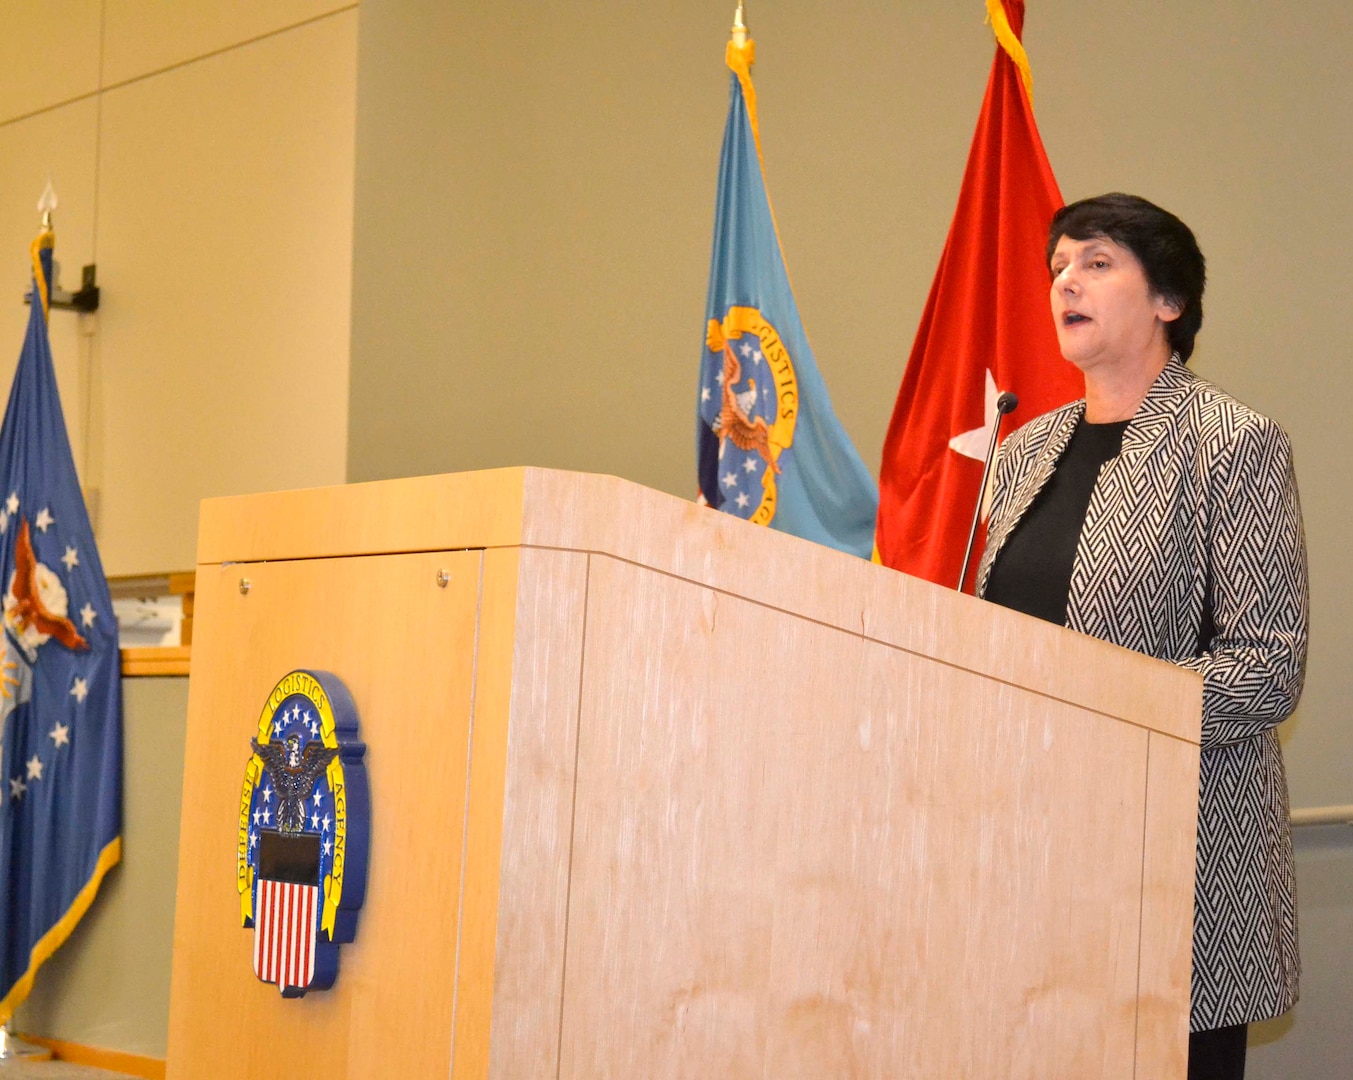 Pam Latker, Defense Logistics Agency Training Career Management Division chief, addresses the latest group of students to graduate the DLA Pathways to Career Excellence Program during a ceremony at the DLA Troop Support headquarters in Philadelphia on Nov. 19, 2019. There were 139 graduates from the two-year program.